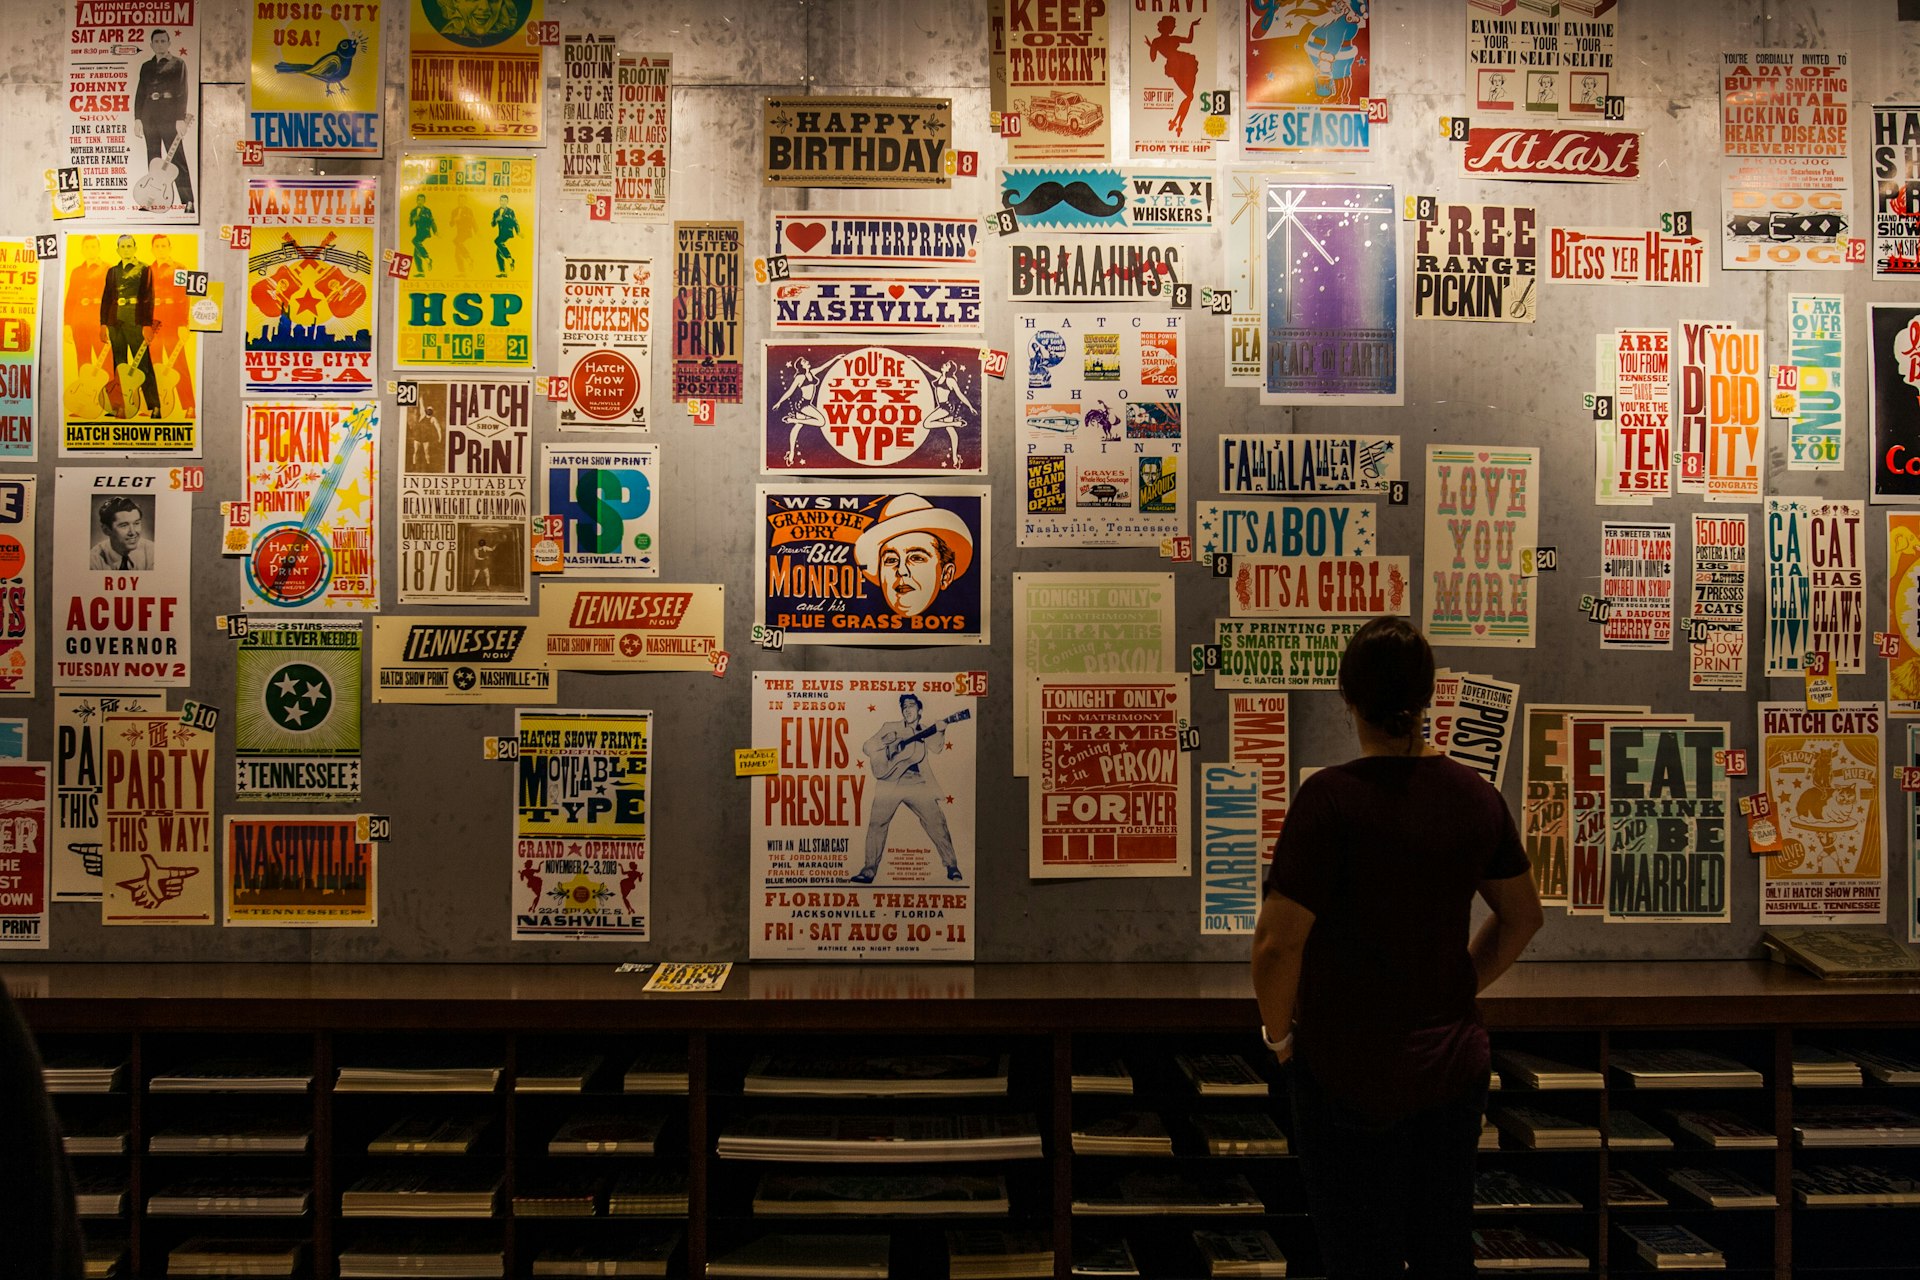 Perusing the prints at Hatch Show Print. Image by Alexander Howard / Lonely Planet